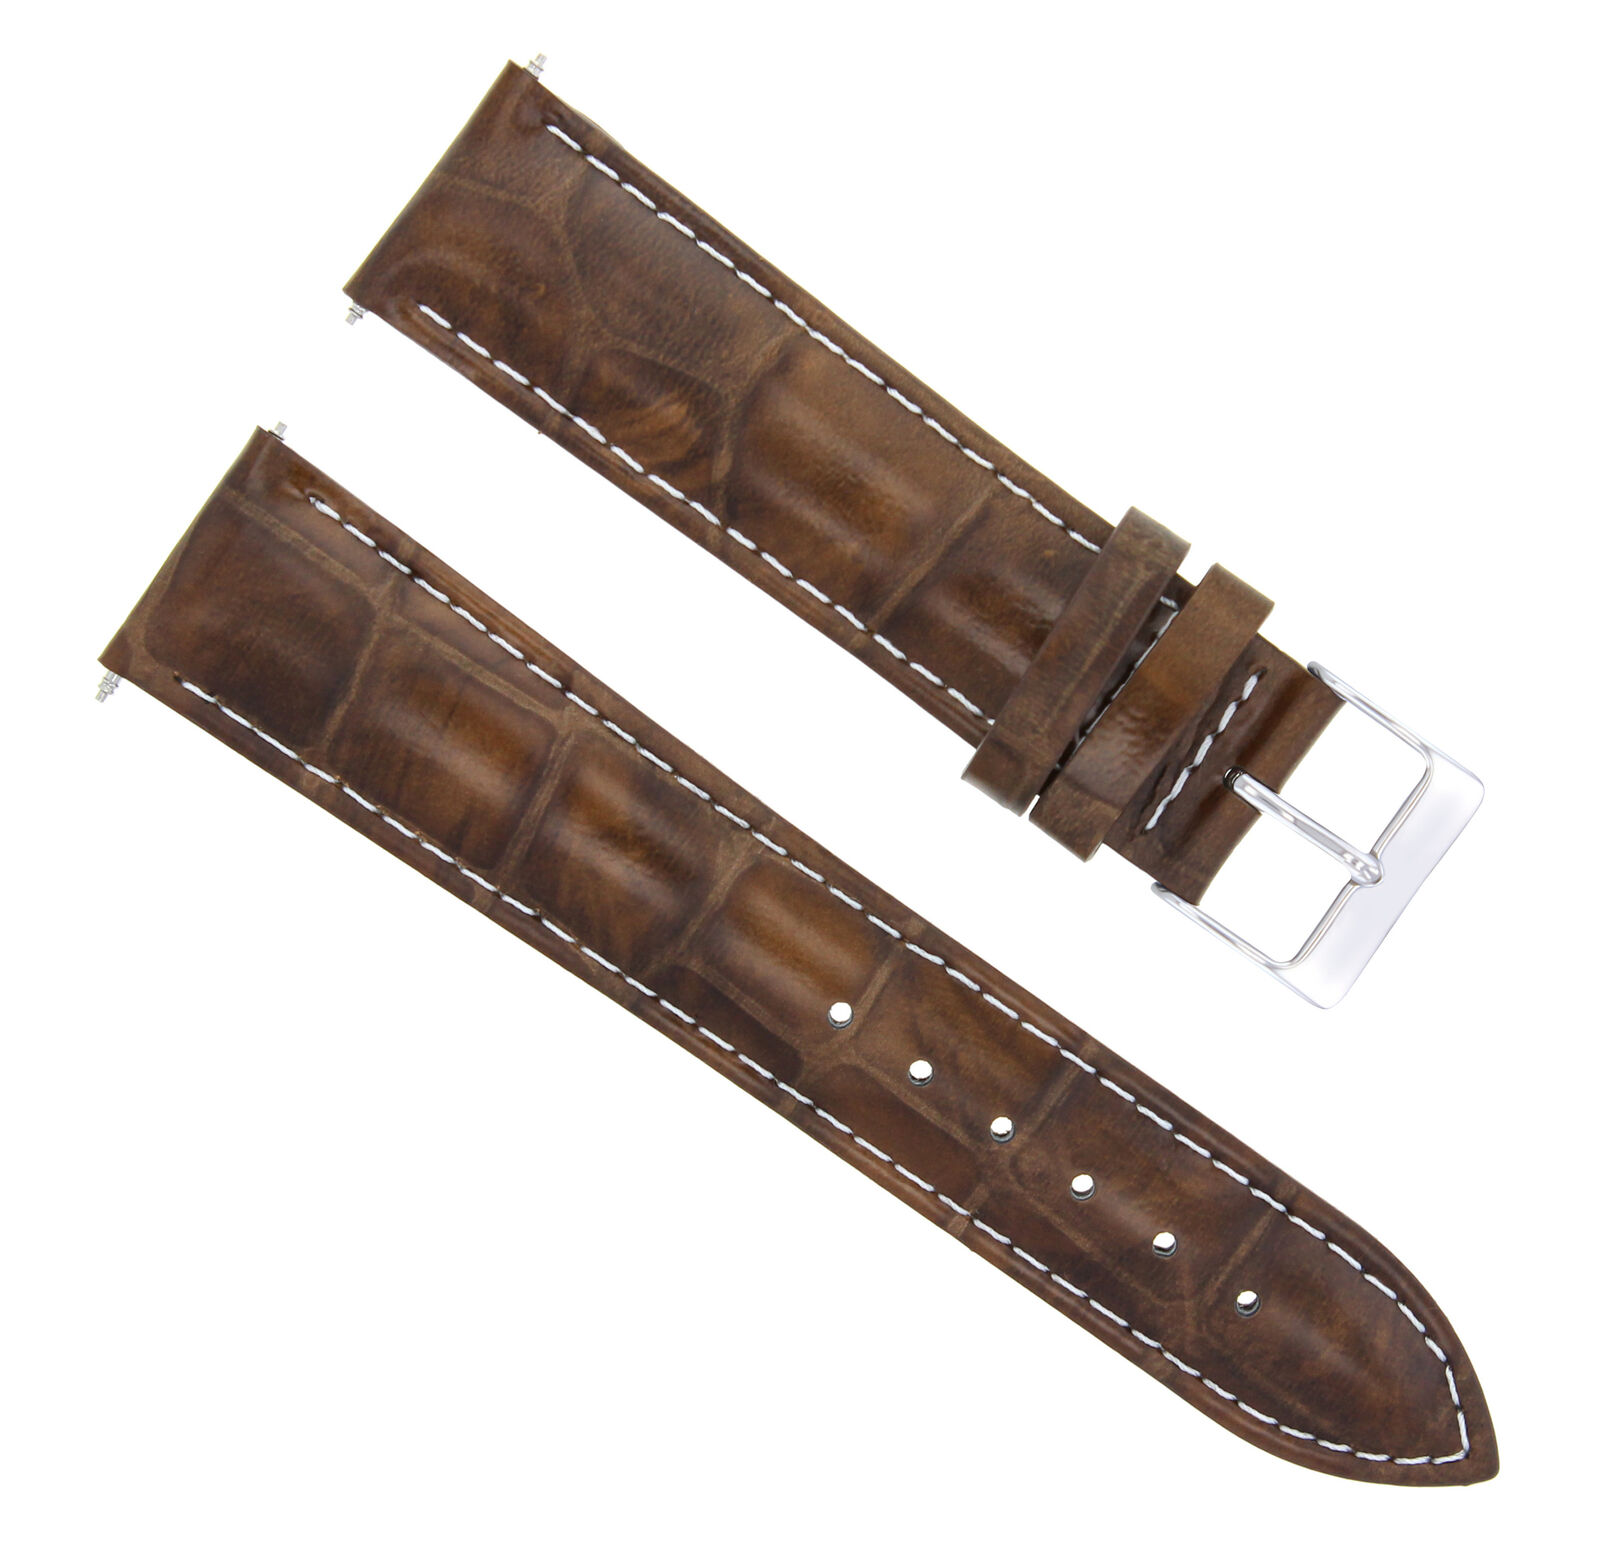 22MM LEATHER WATCH BAND STRAP FOR CHOPARD WATCH LIGHT BROWN  WHITE STITCHING